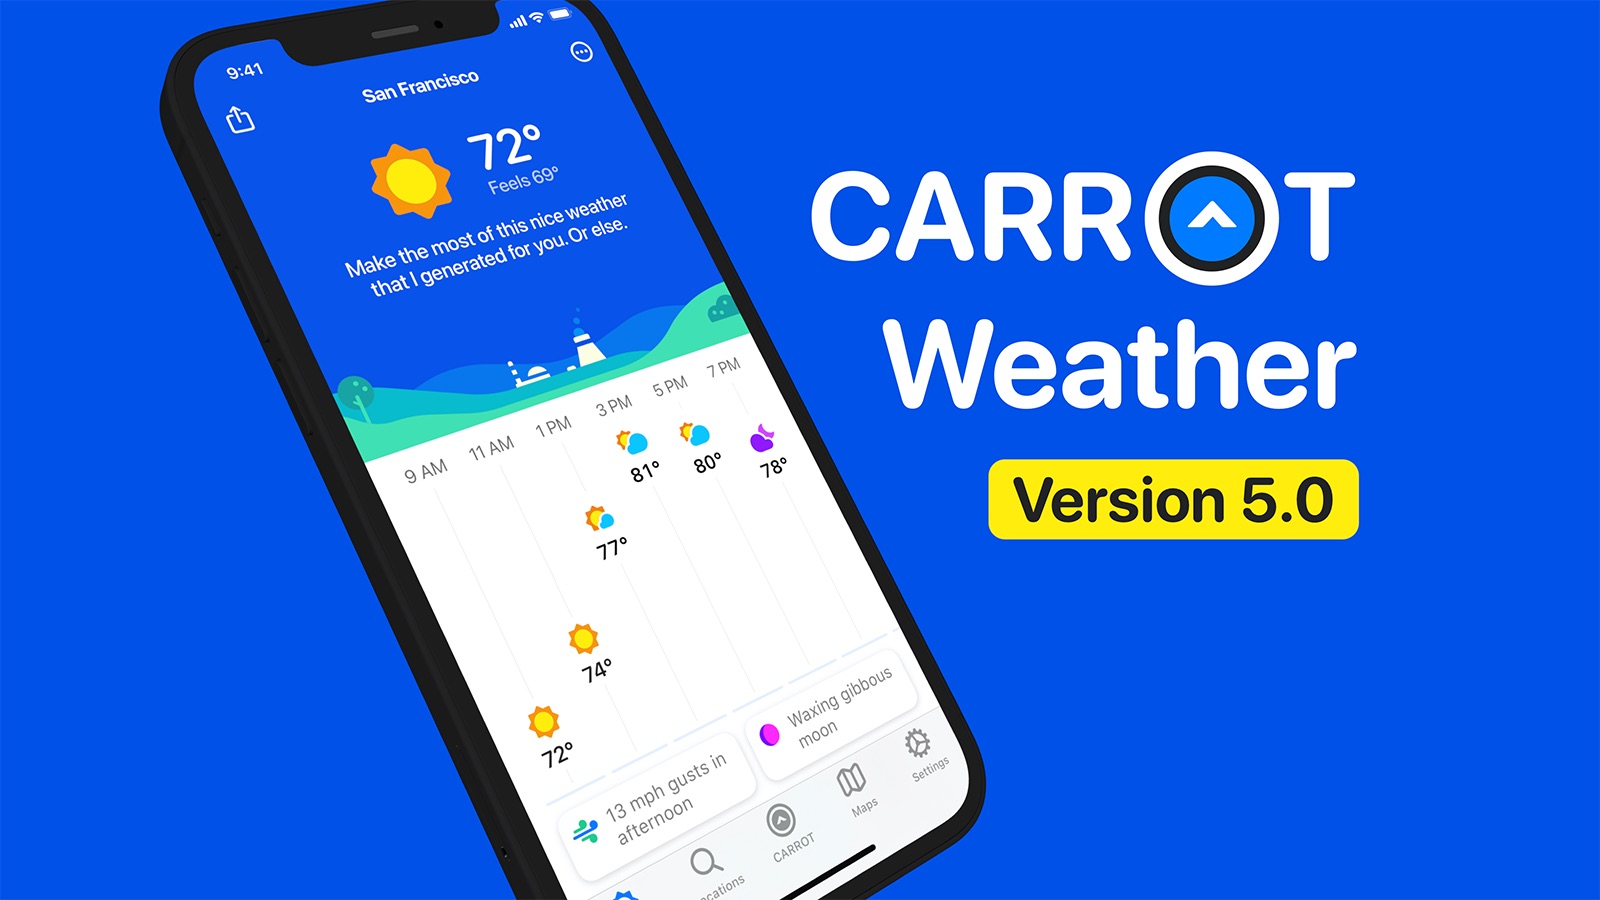 carrot weather watch complications